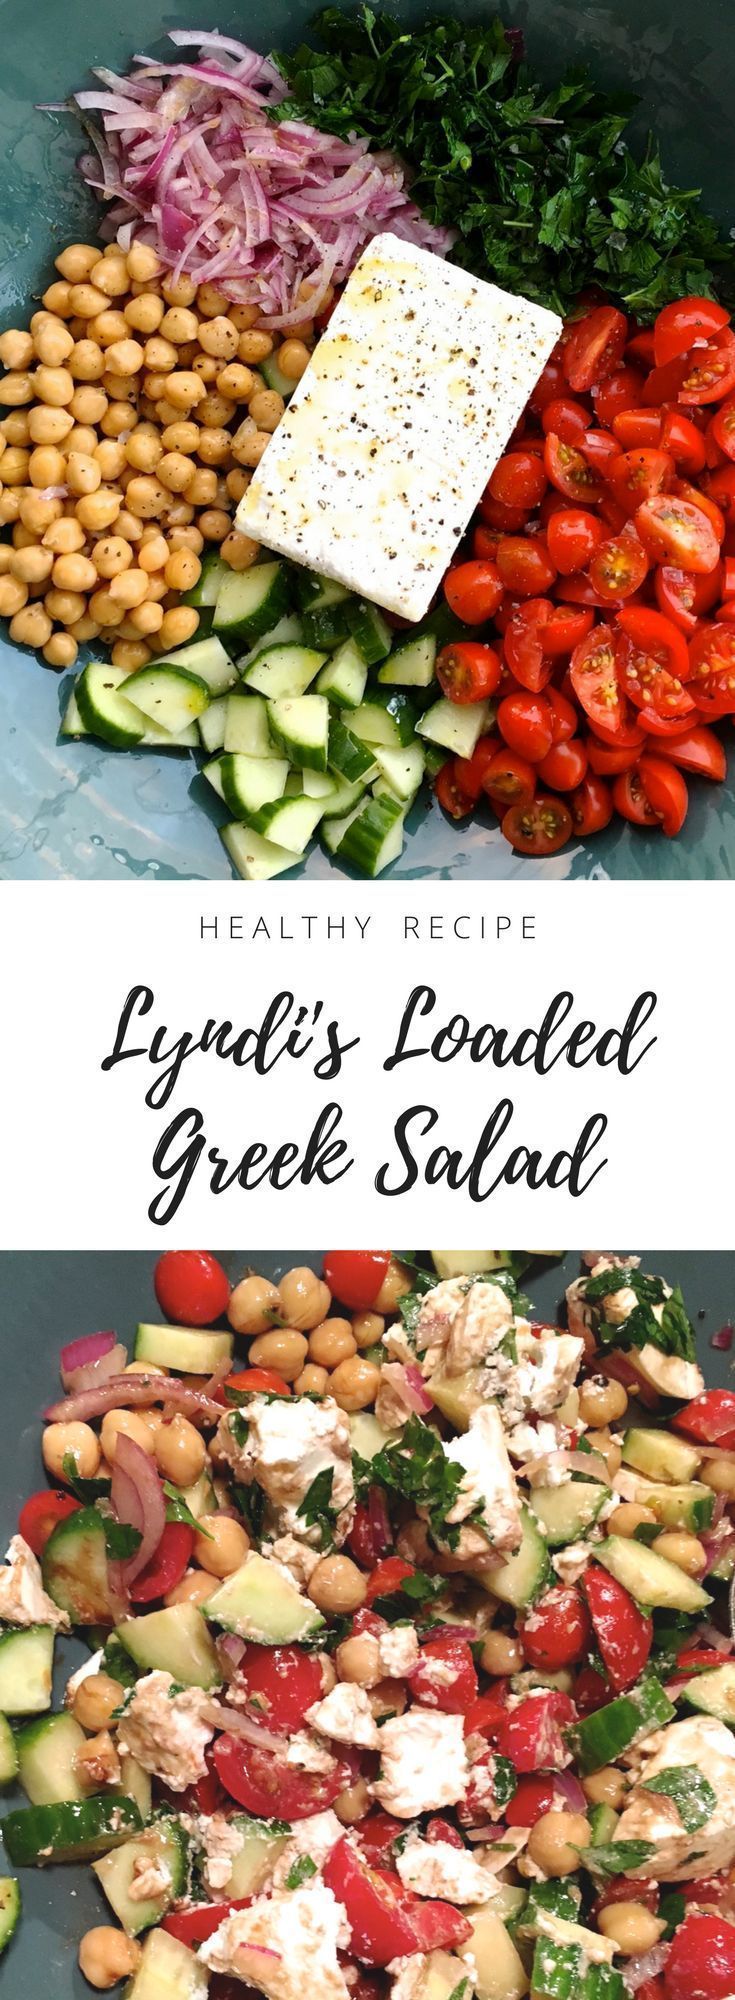 16 healthy recipes For Weight Loss family ideas